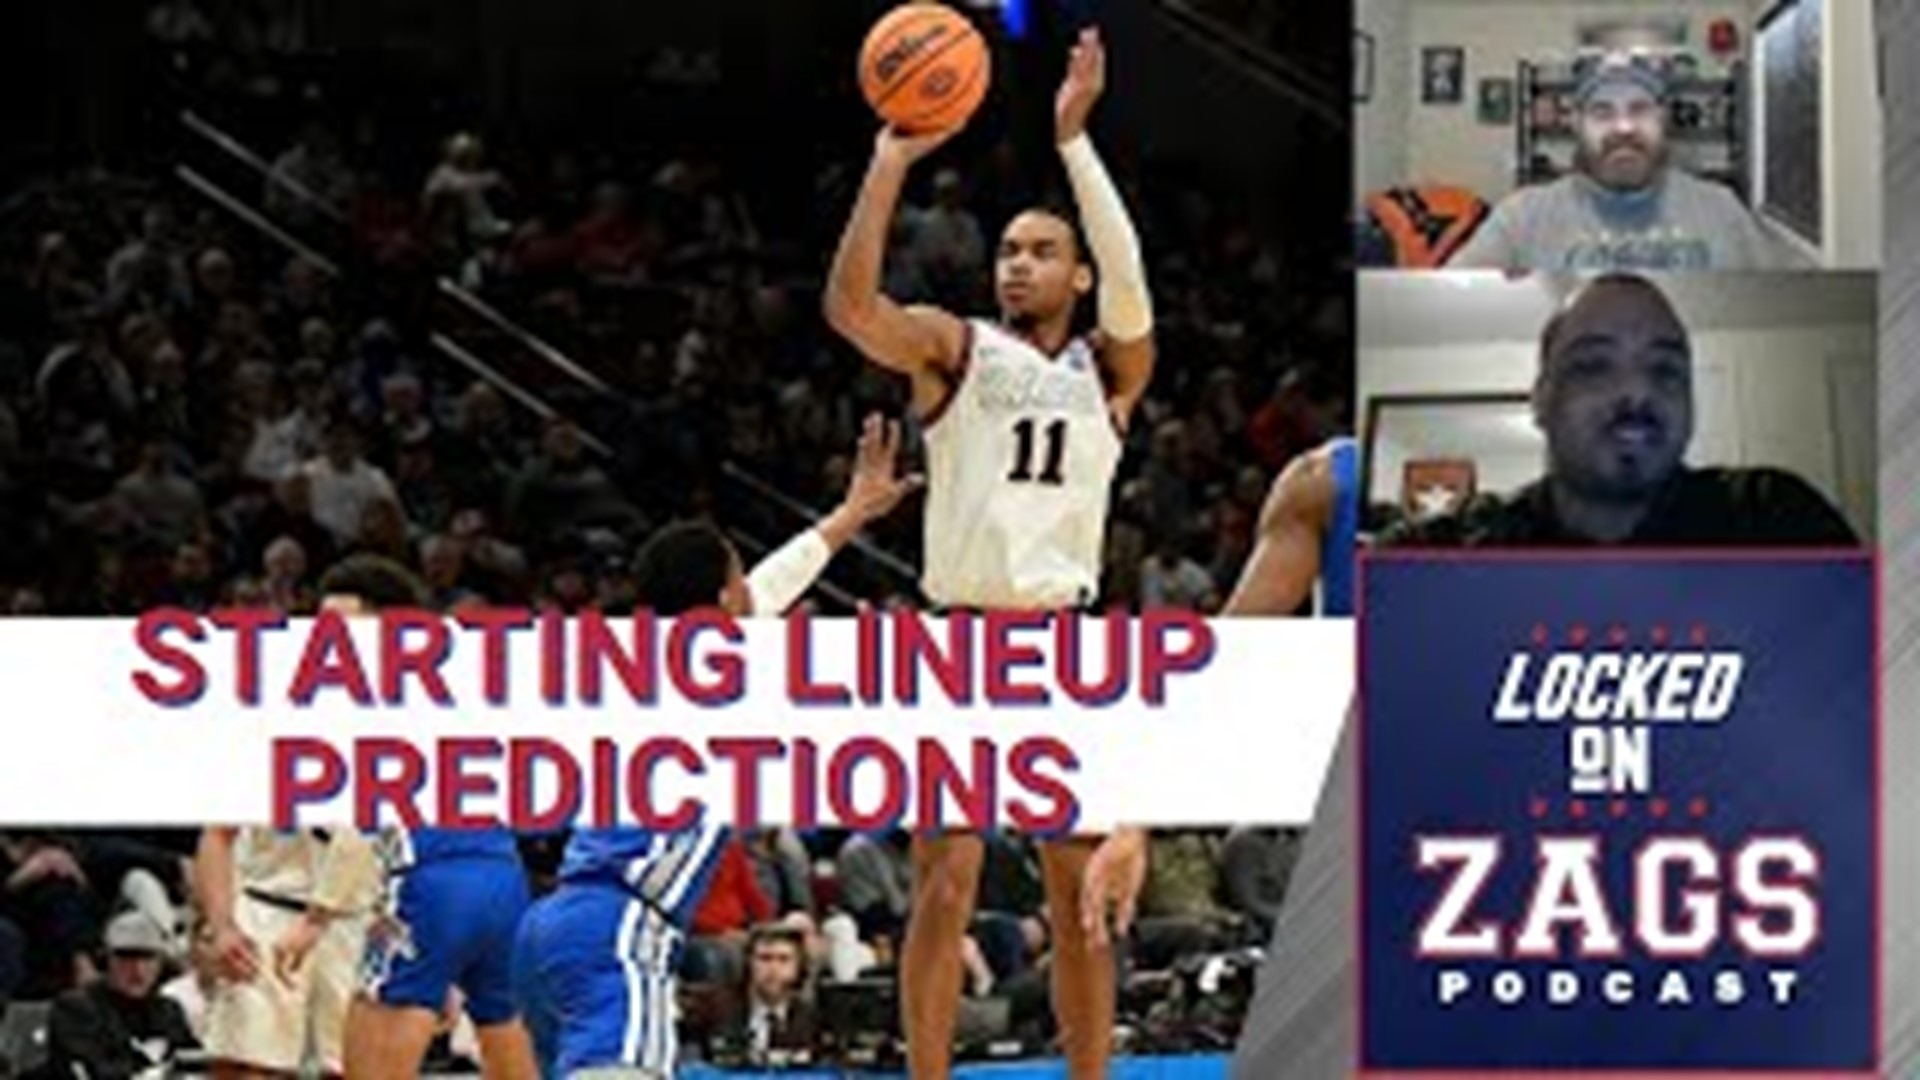 We break down potential starting lineups and rotations the Zags could employ next year, and discuss how this roster crunch will impact the players.